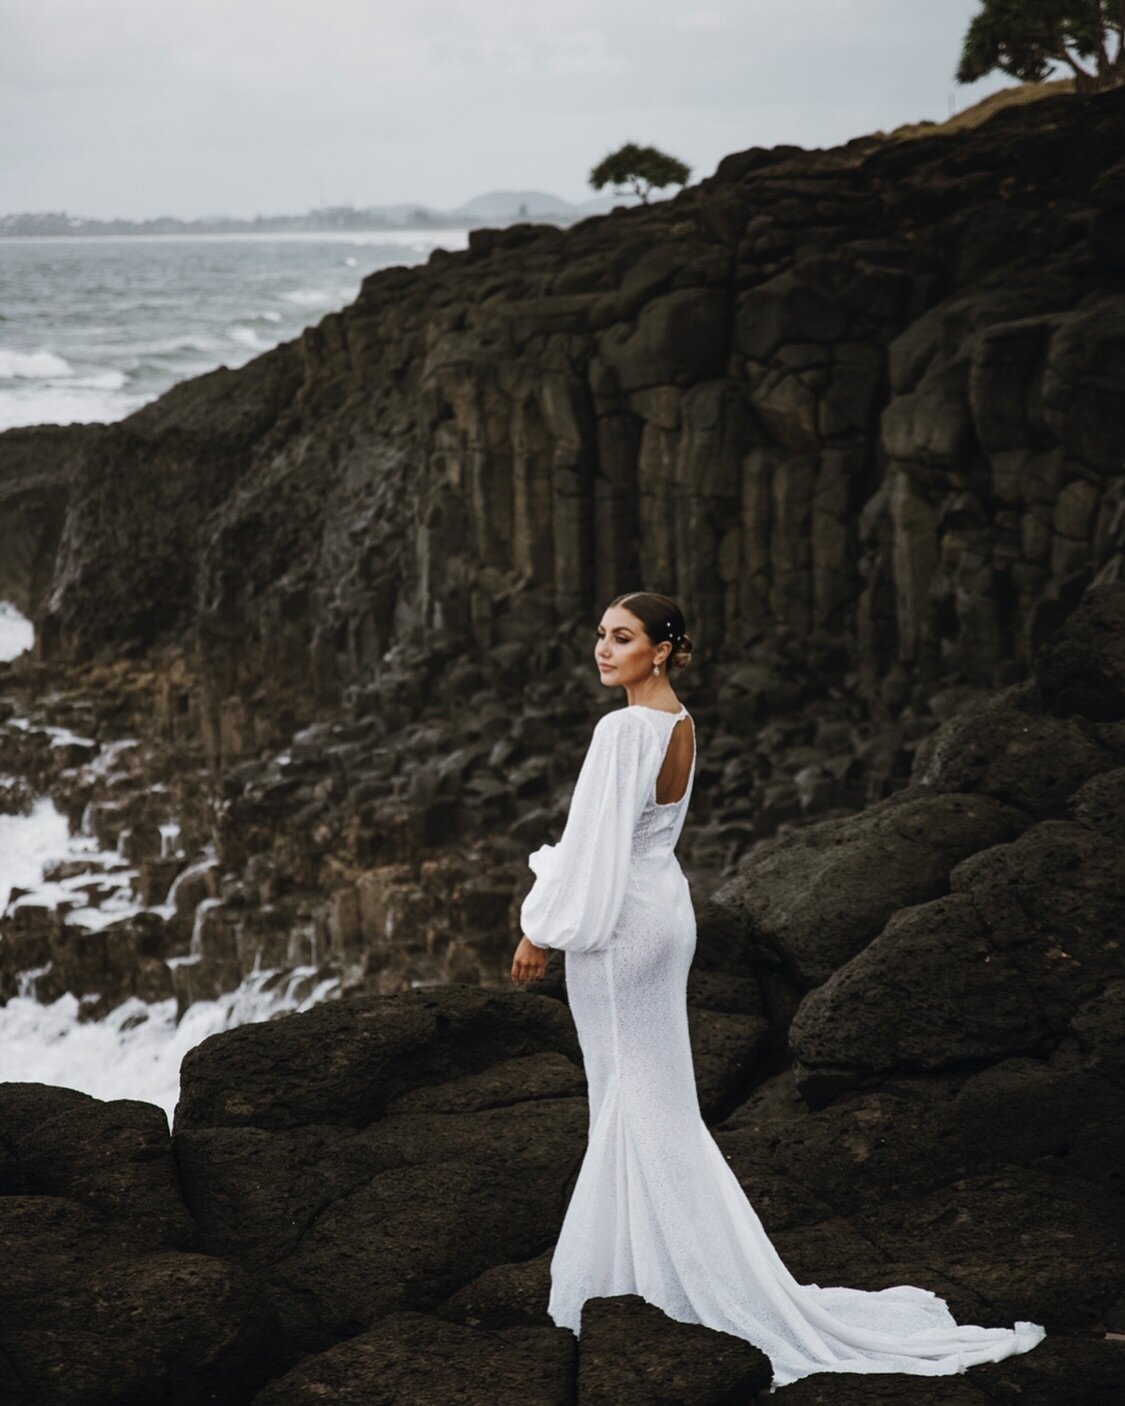 Don&rsquo;t mind me posting in the middle of the day on a Thursday, i&rsquo;m always busy during peak times 😅😅

Anywho, how gorgeous is Zoe, and how breathtaking is this location! If any of my Kingscliff couples want to shoot their portraits here j